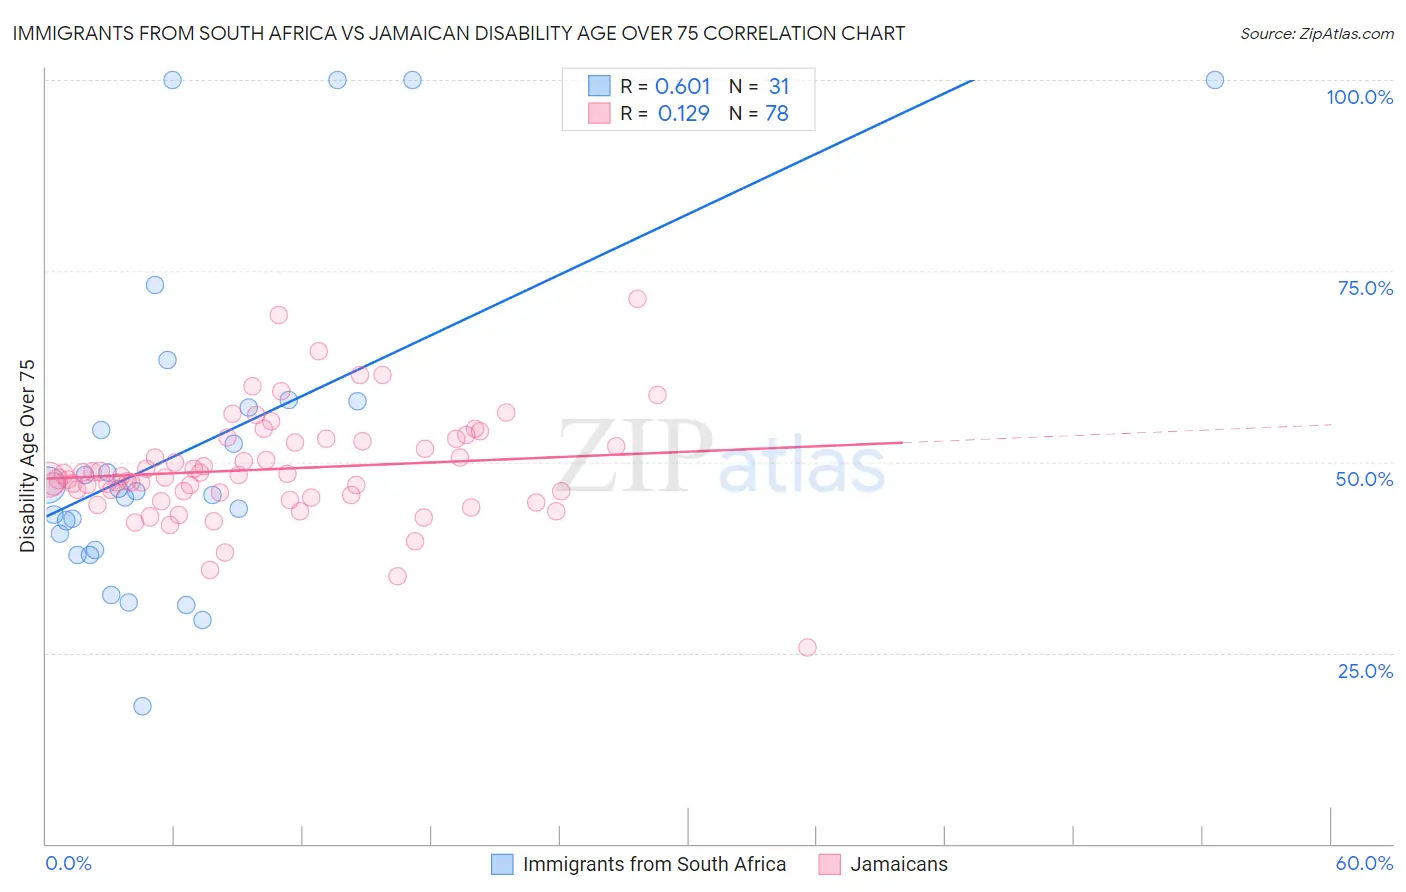 Immigrants from South Africa vs Jamaican Disability Age Over 75